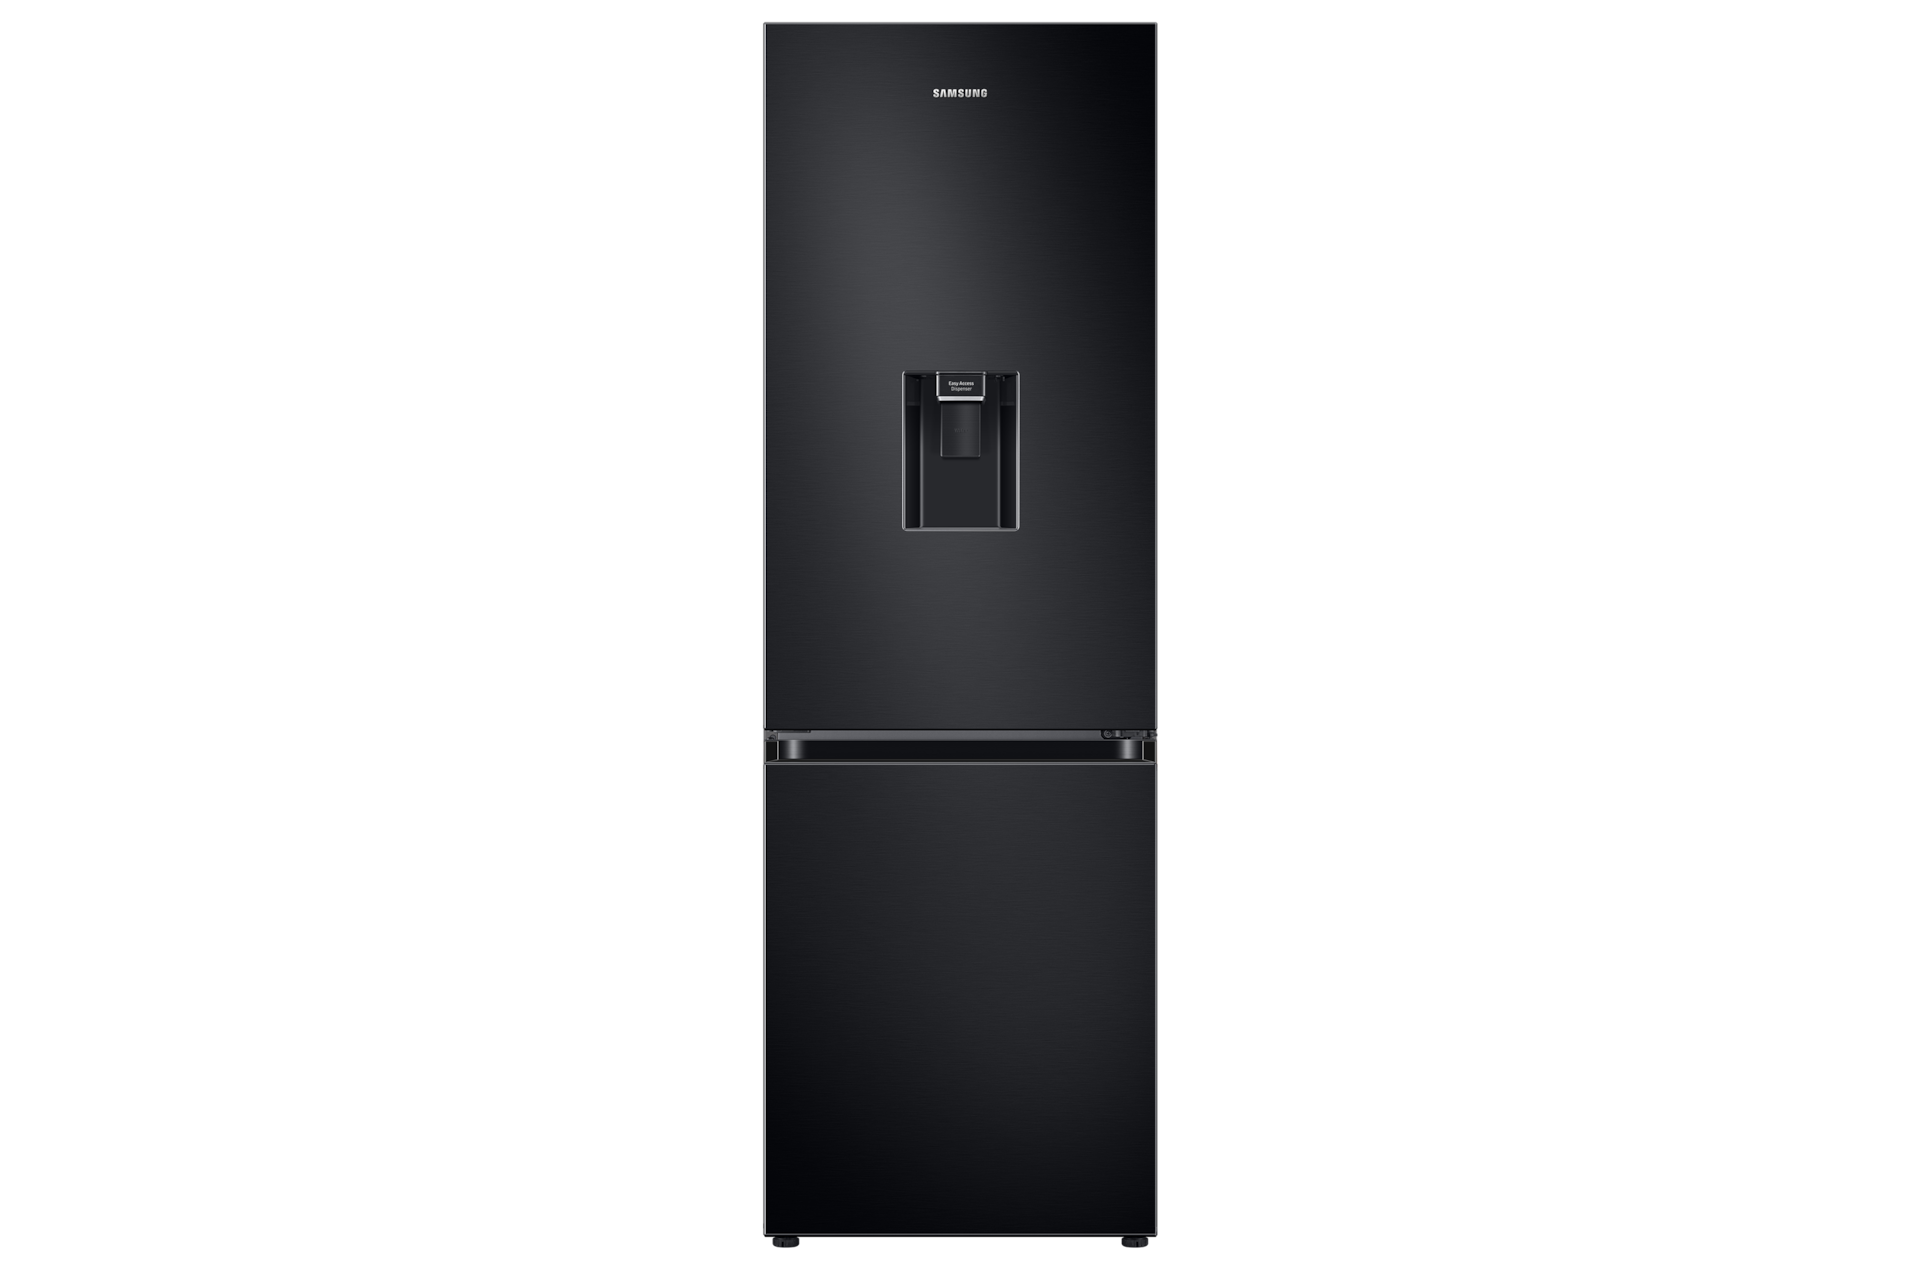 A Samsung black Series 6 classic fridge freezer RB34T632EBN with a non-plumbed water dispenser on a white background.